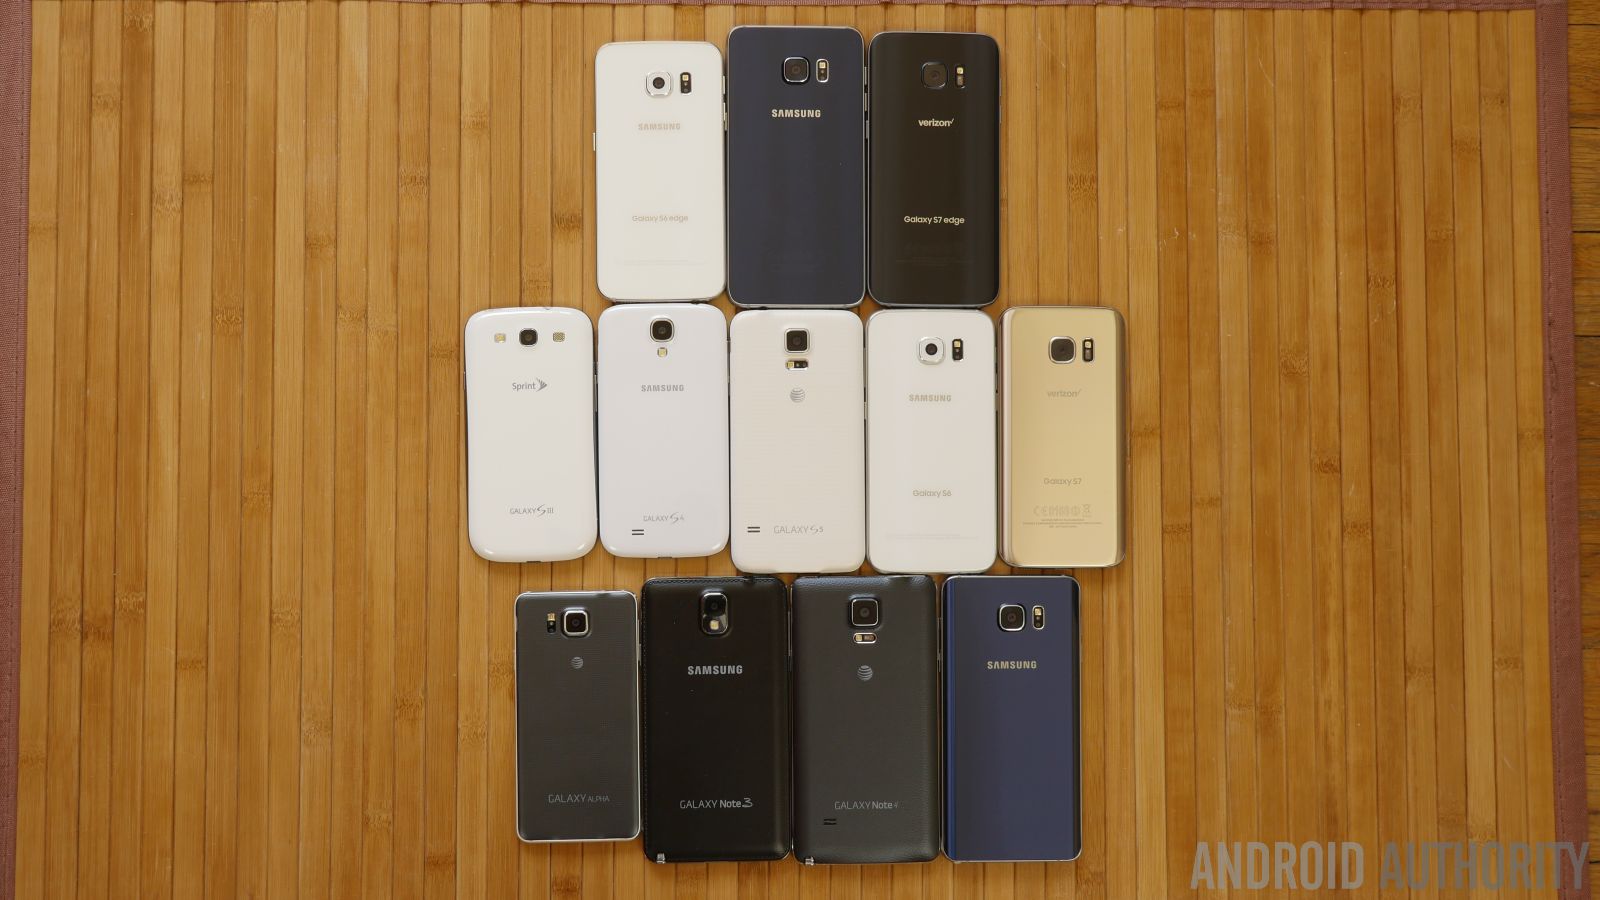 A history of Samsung's Android designs